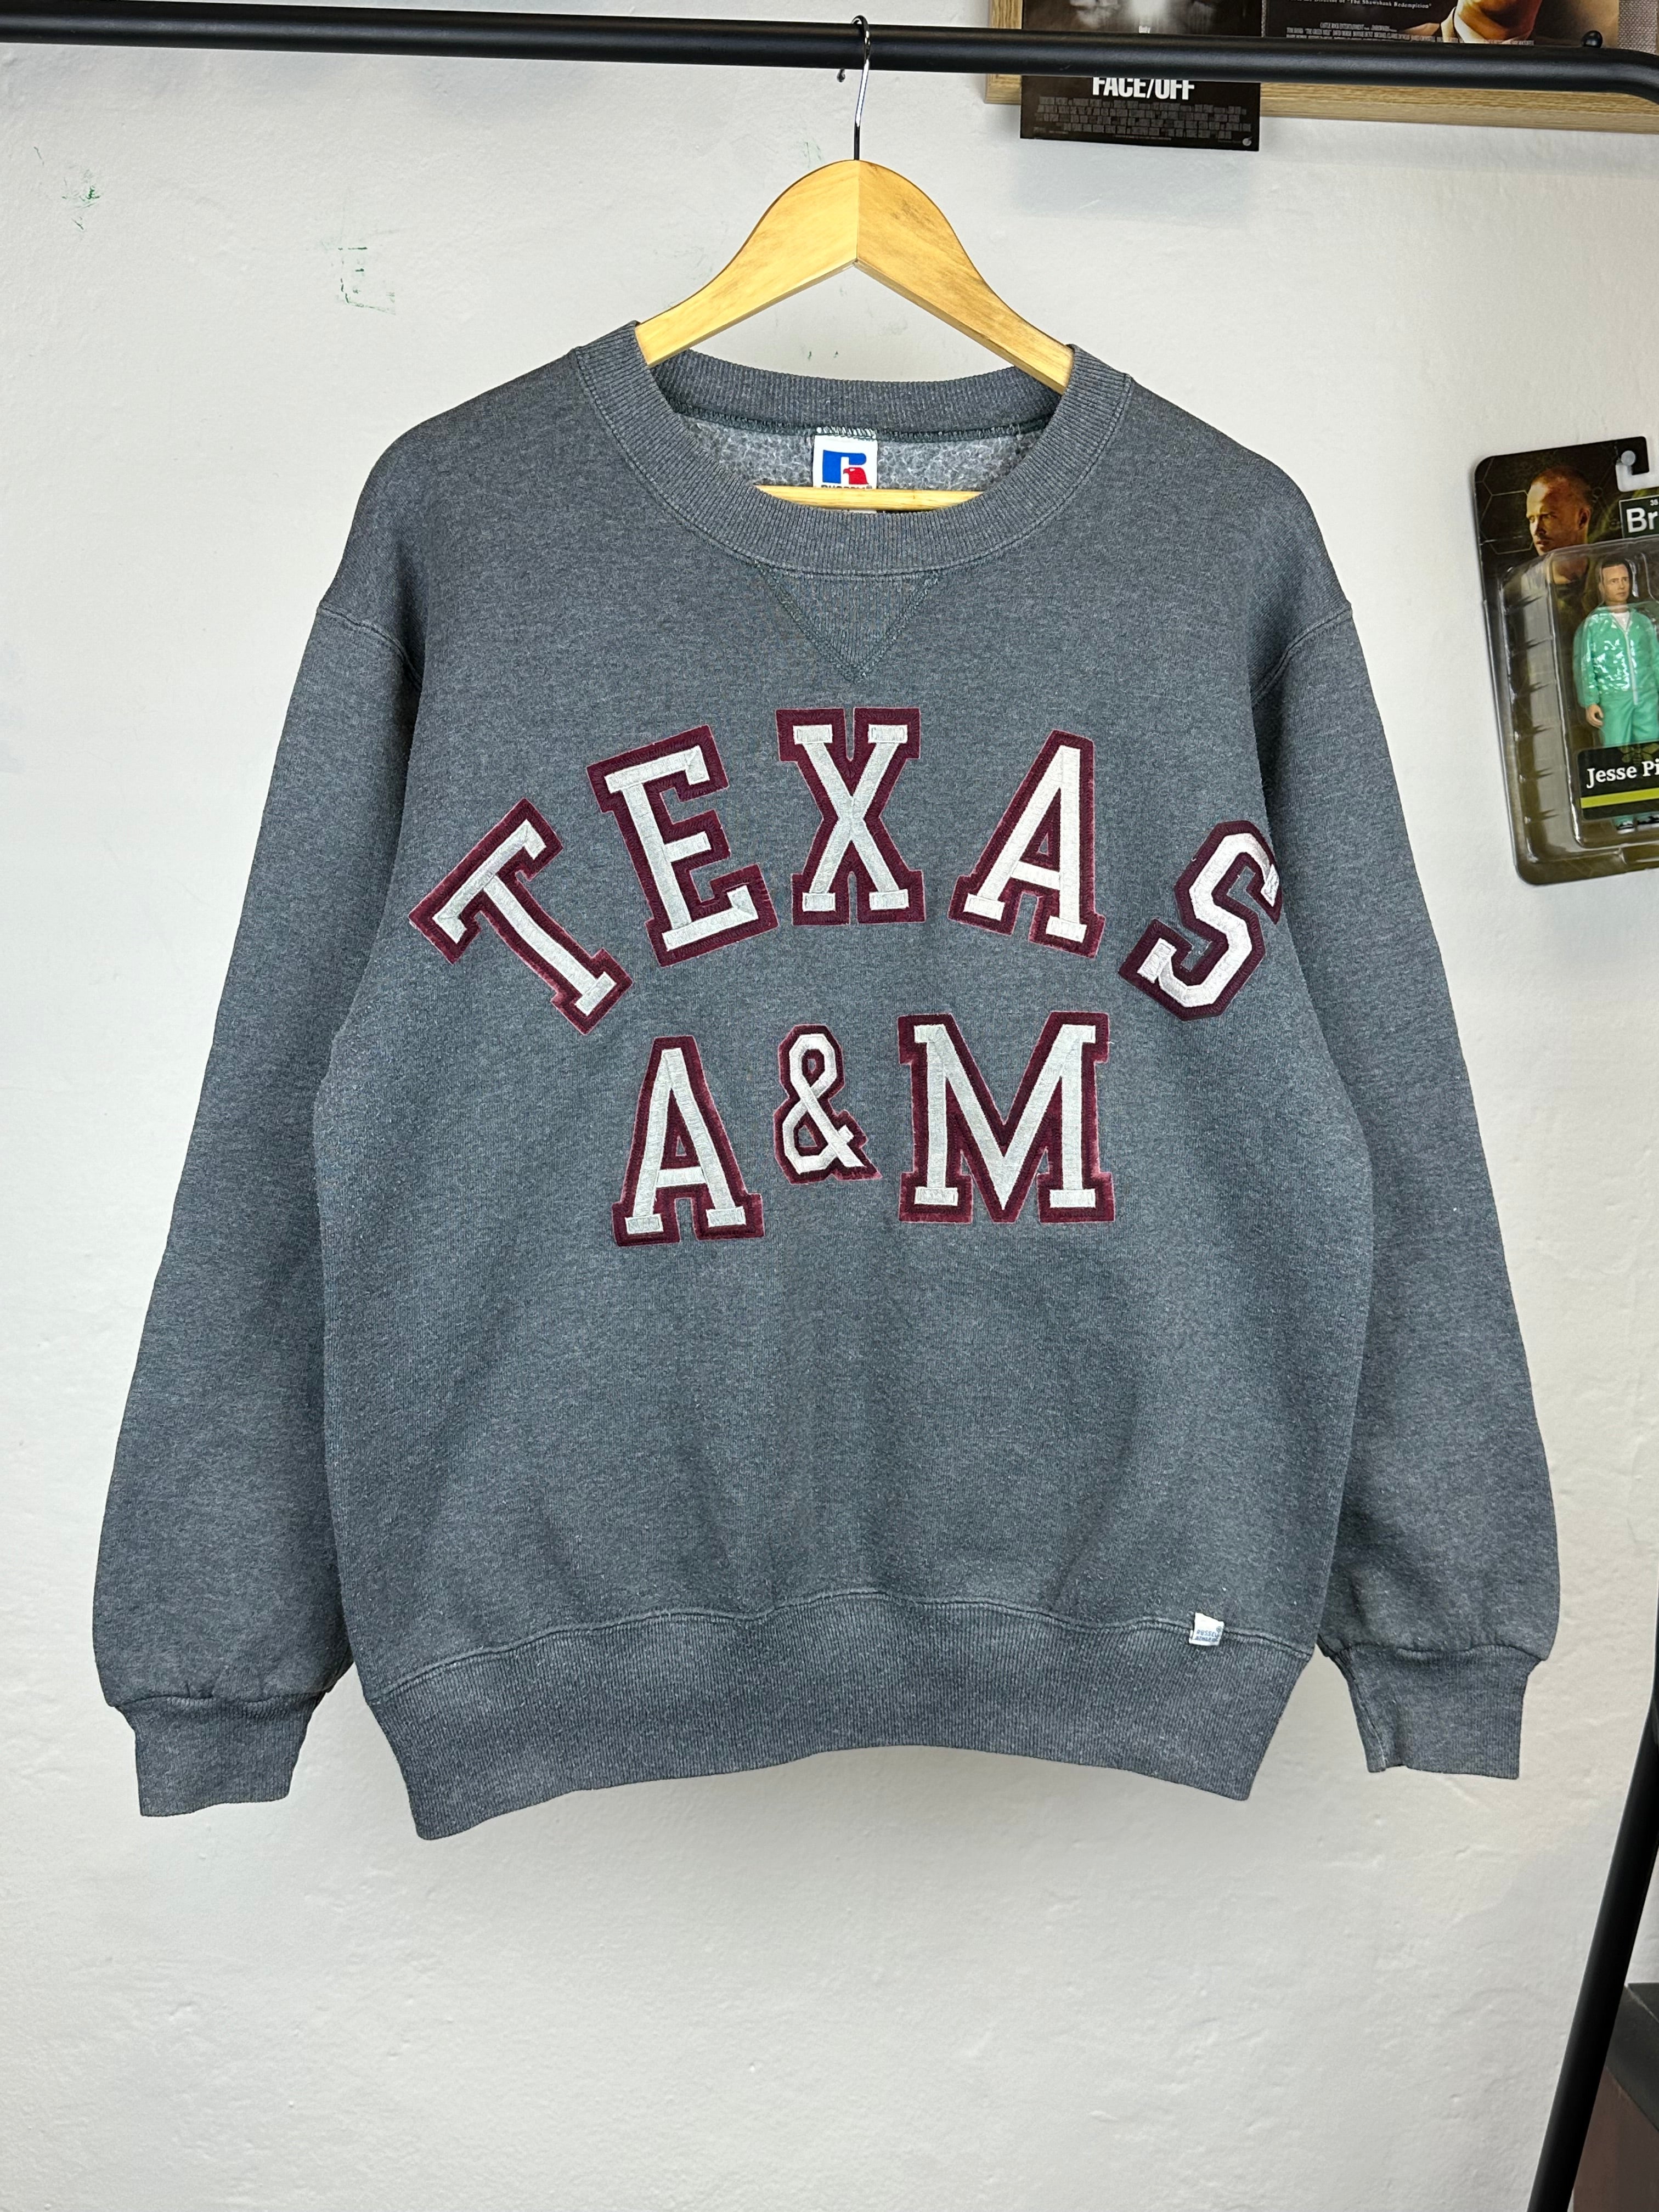 Vintage Texas A&M Russell crewneck - size M